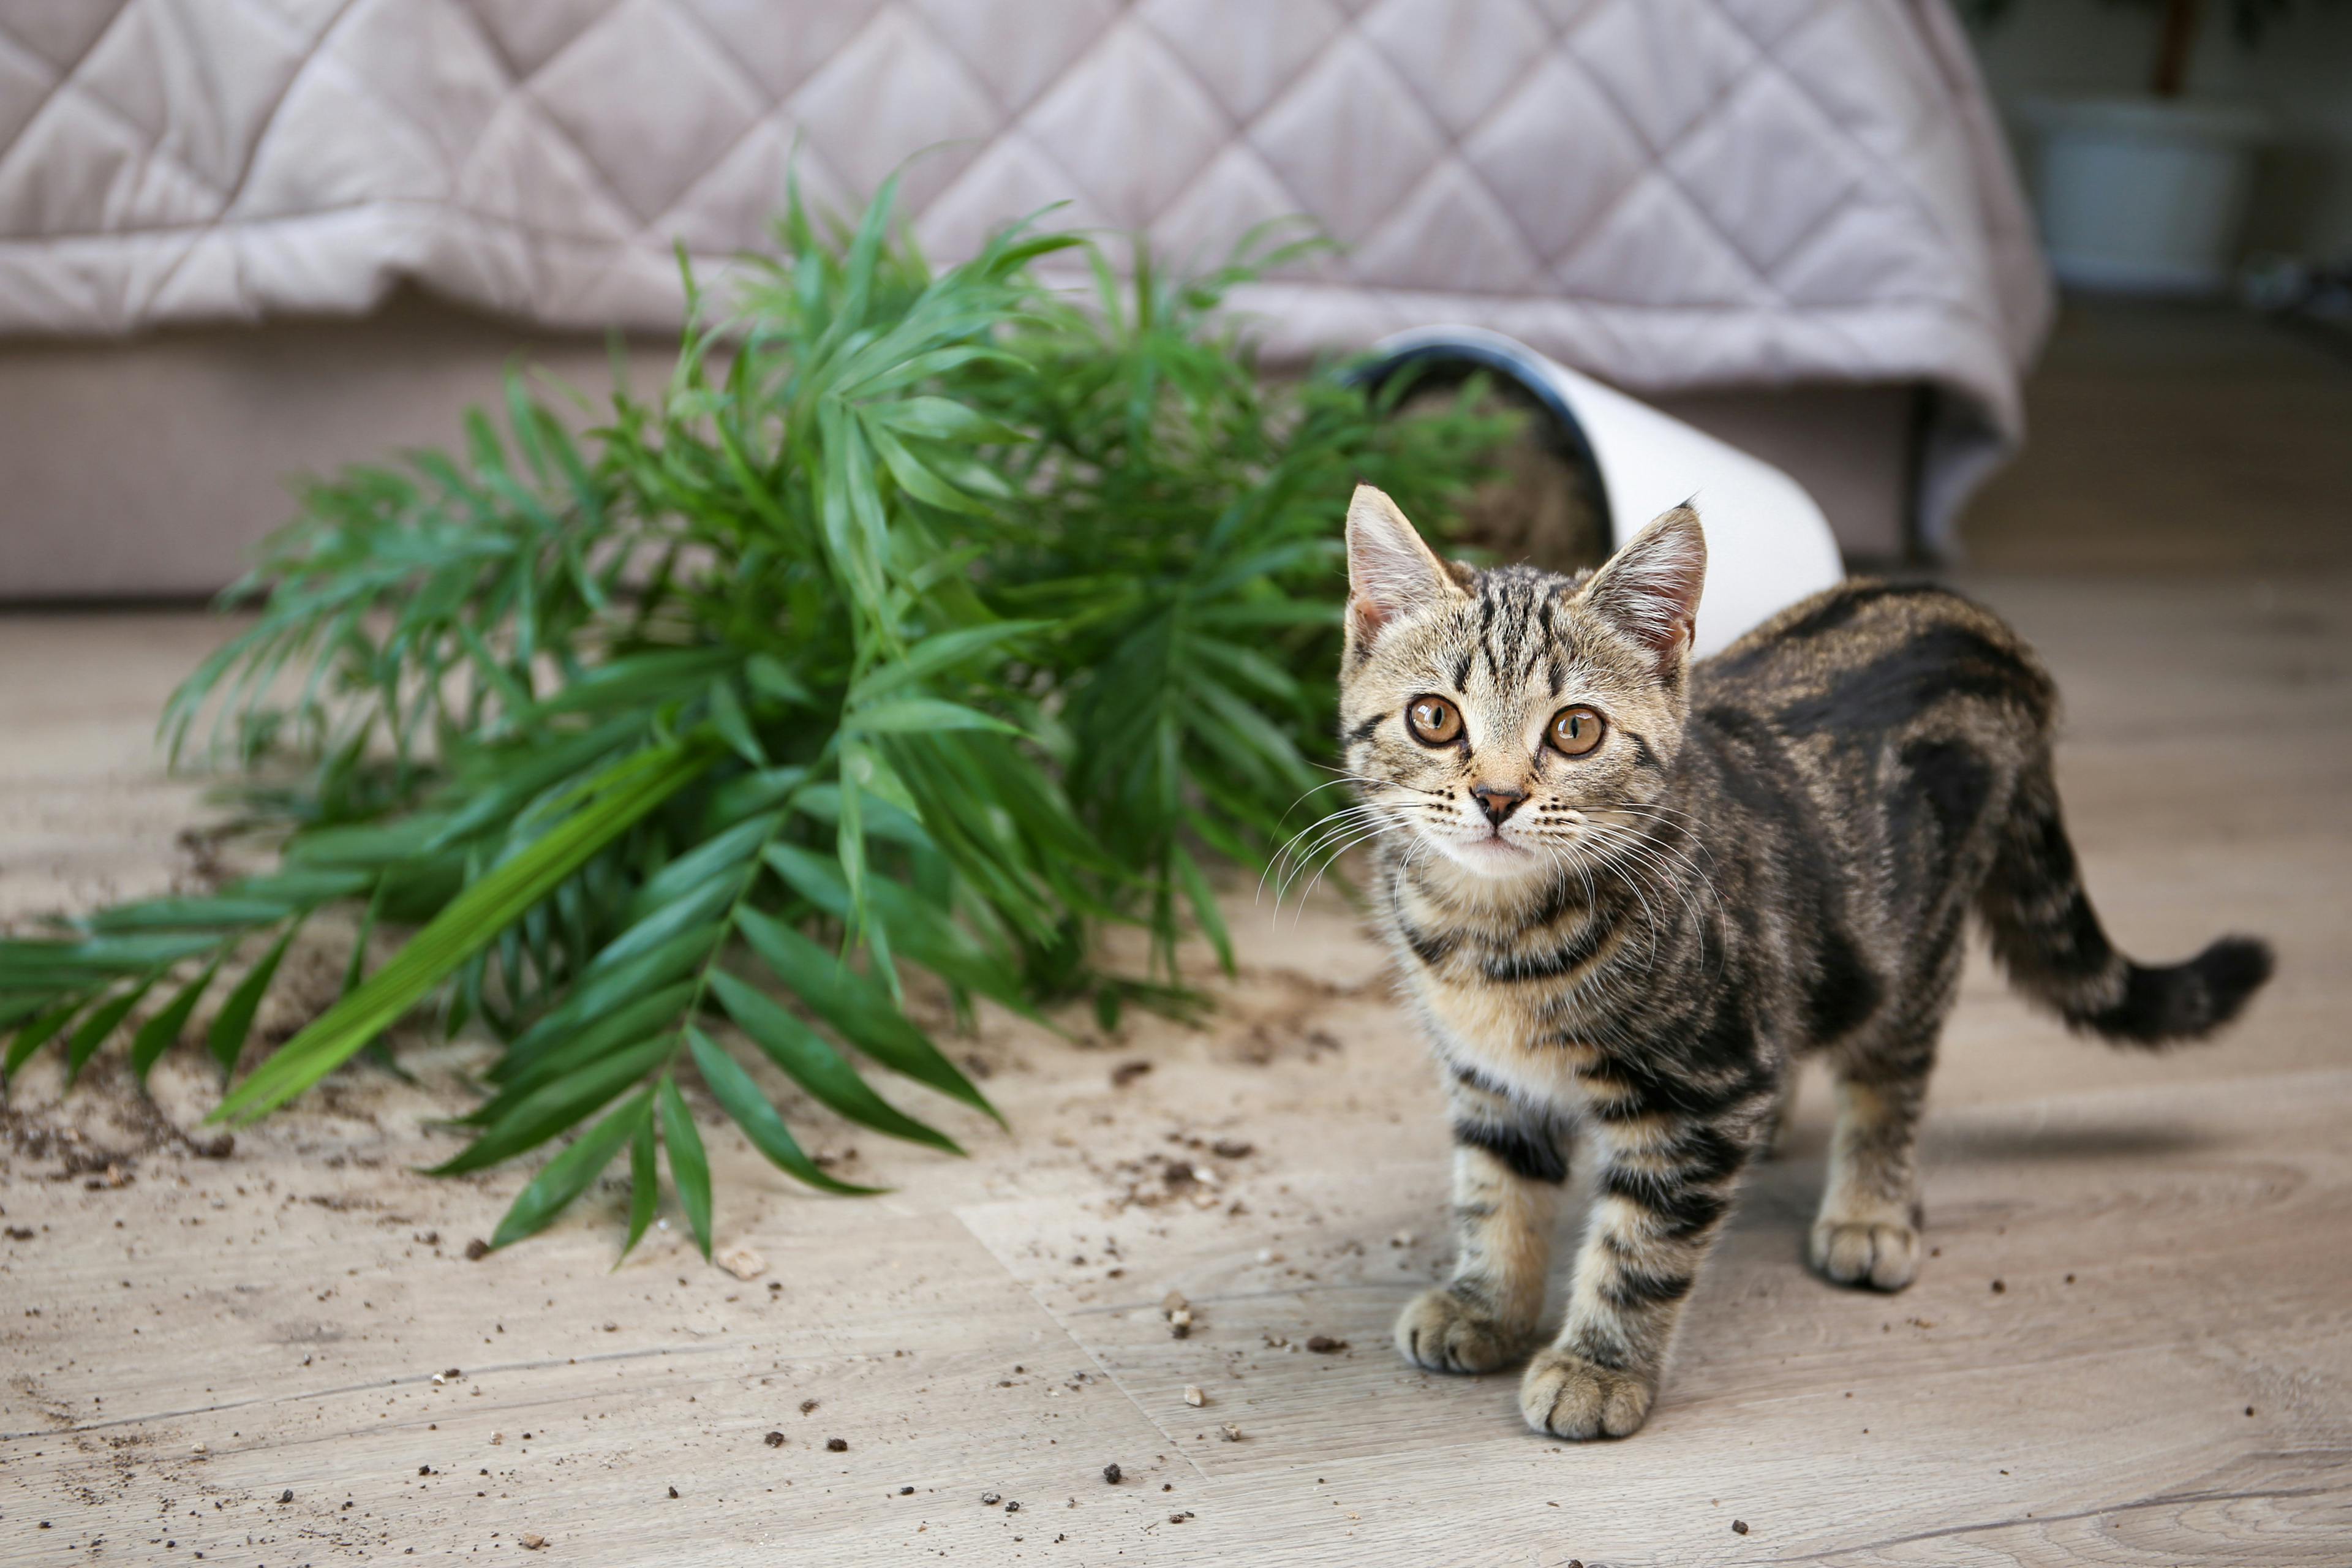 Stock image of a cat with a plant knocked over on carpet